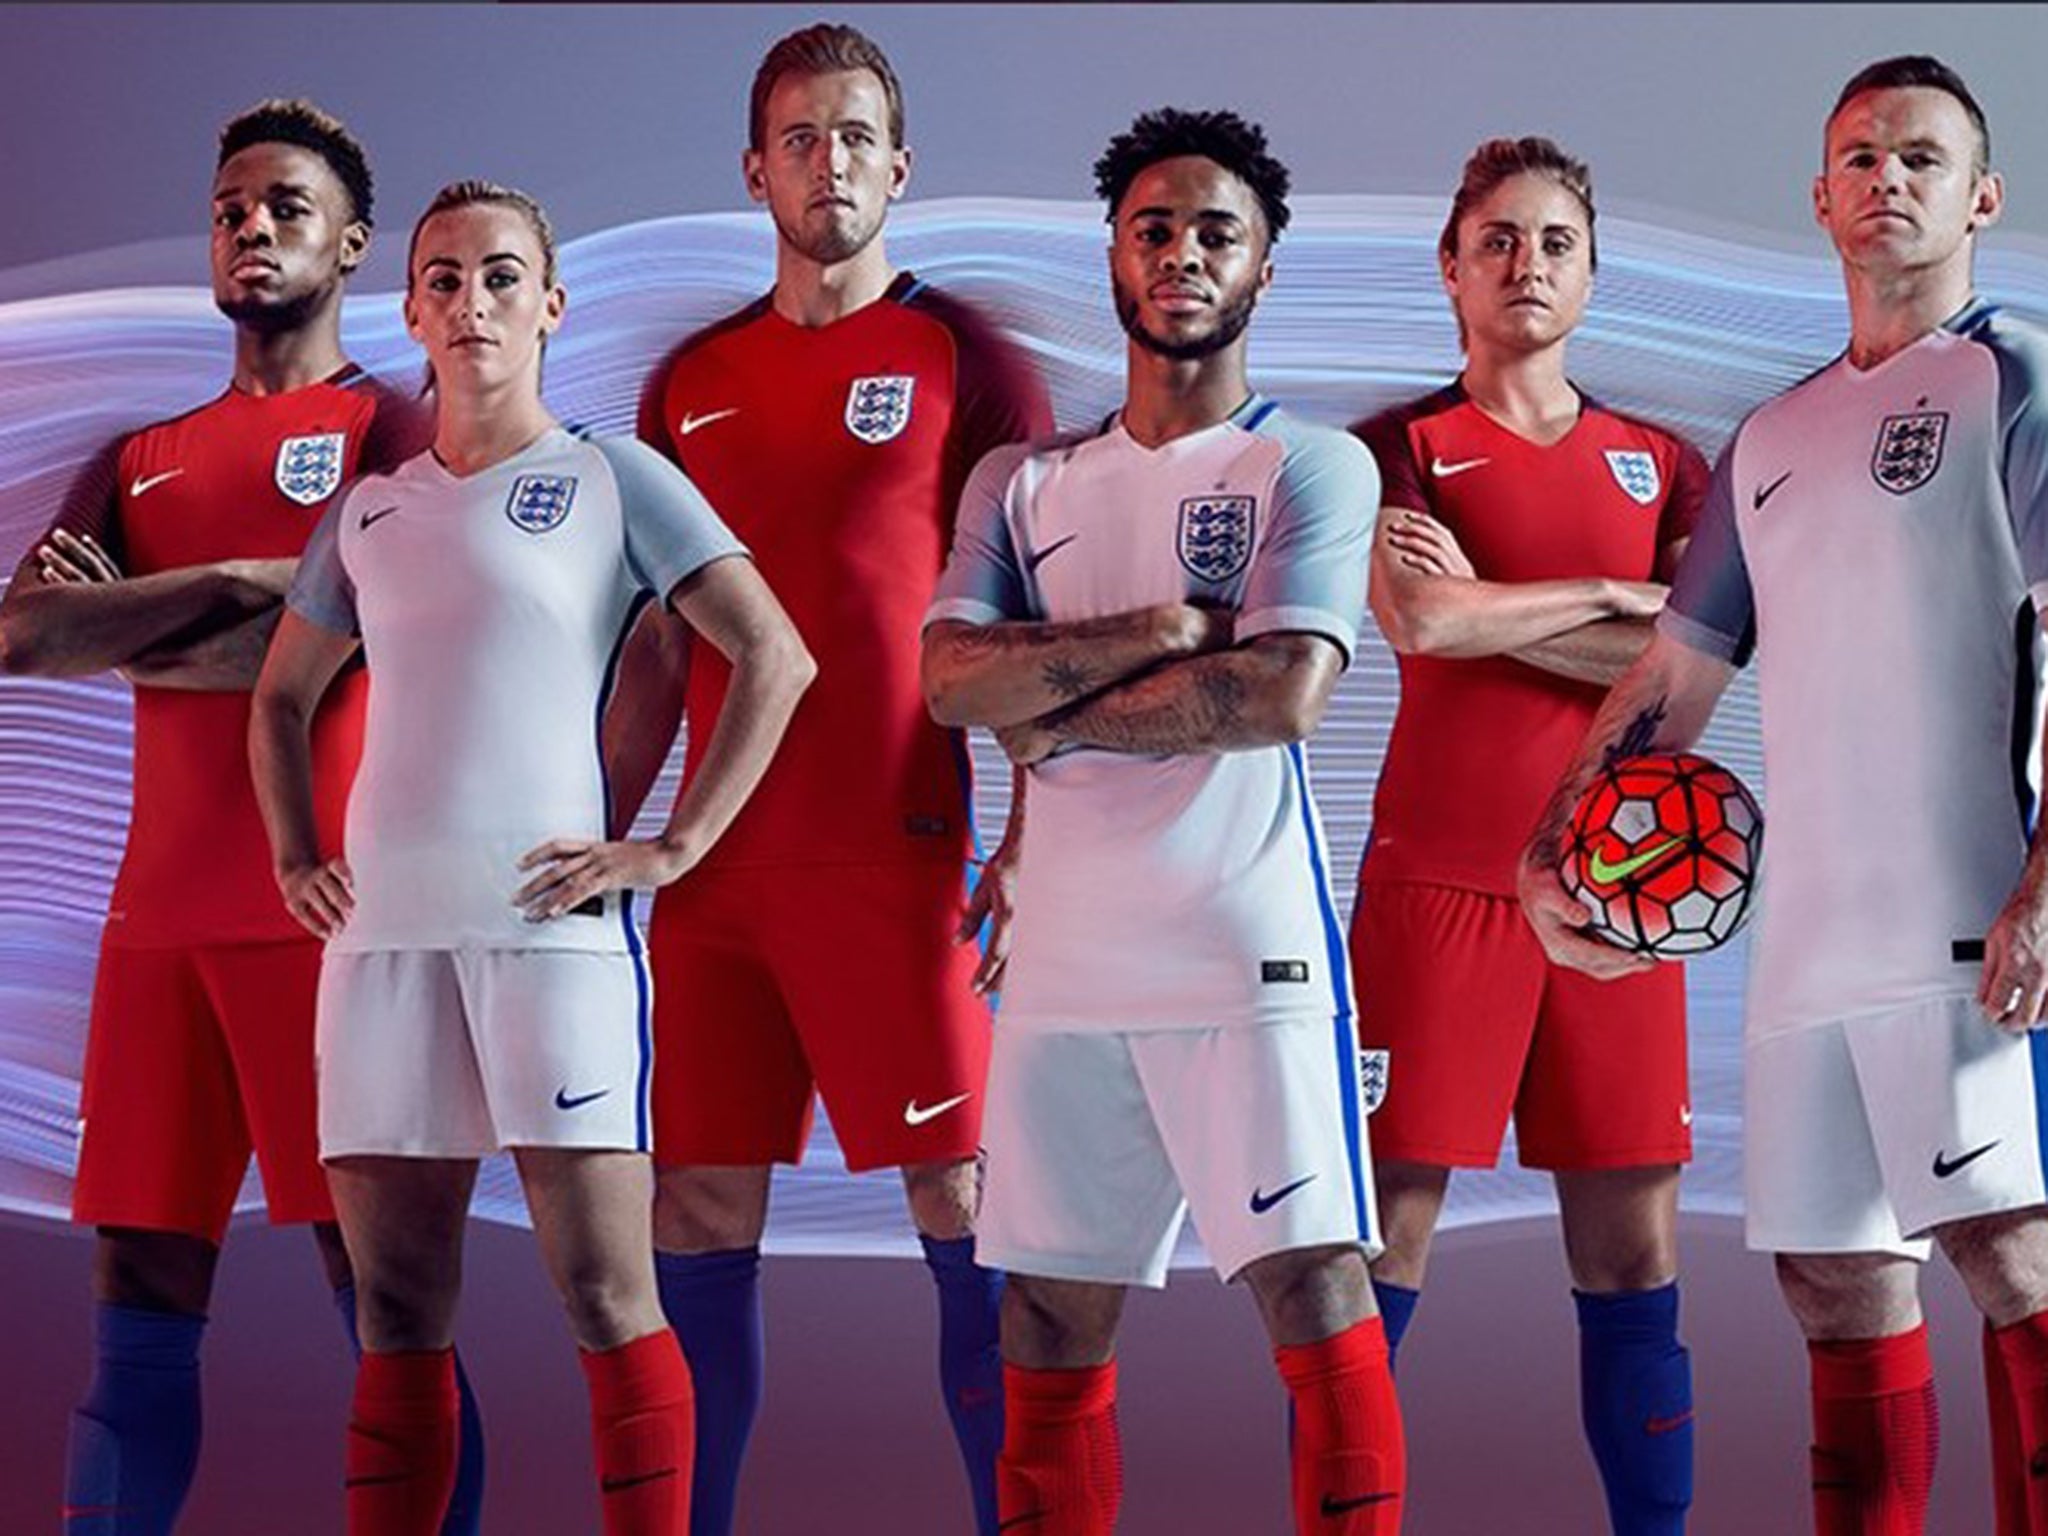 The new England kits made by Nike have caused quite a stir